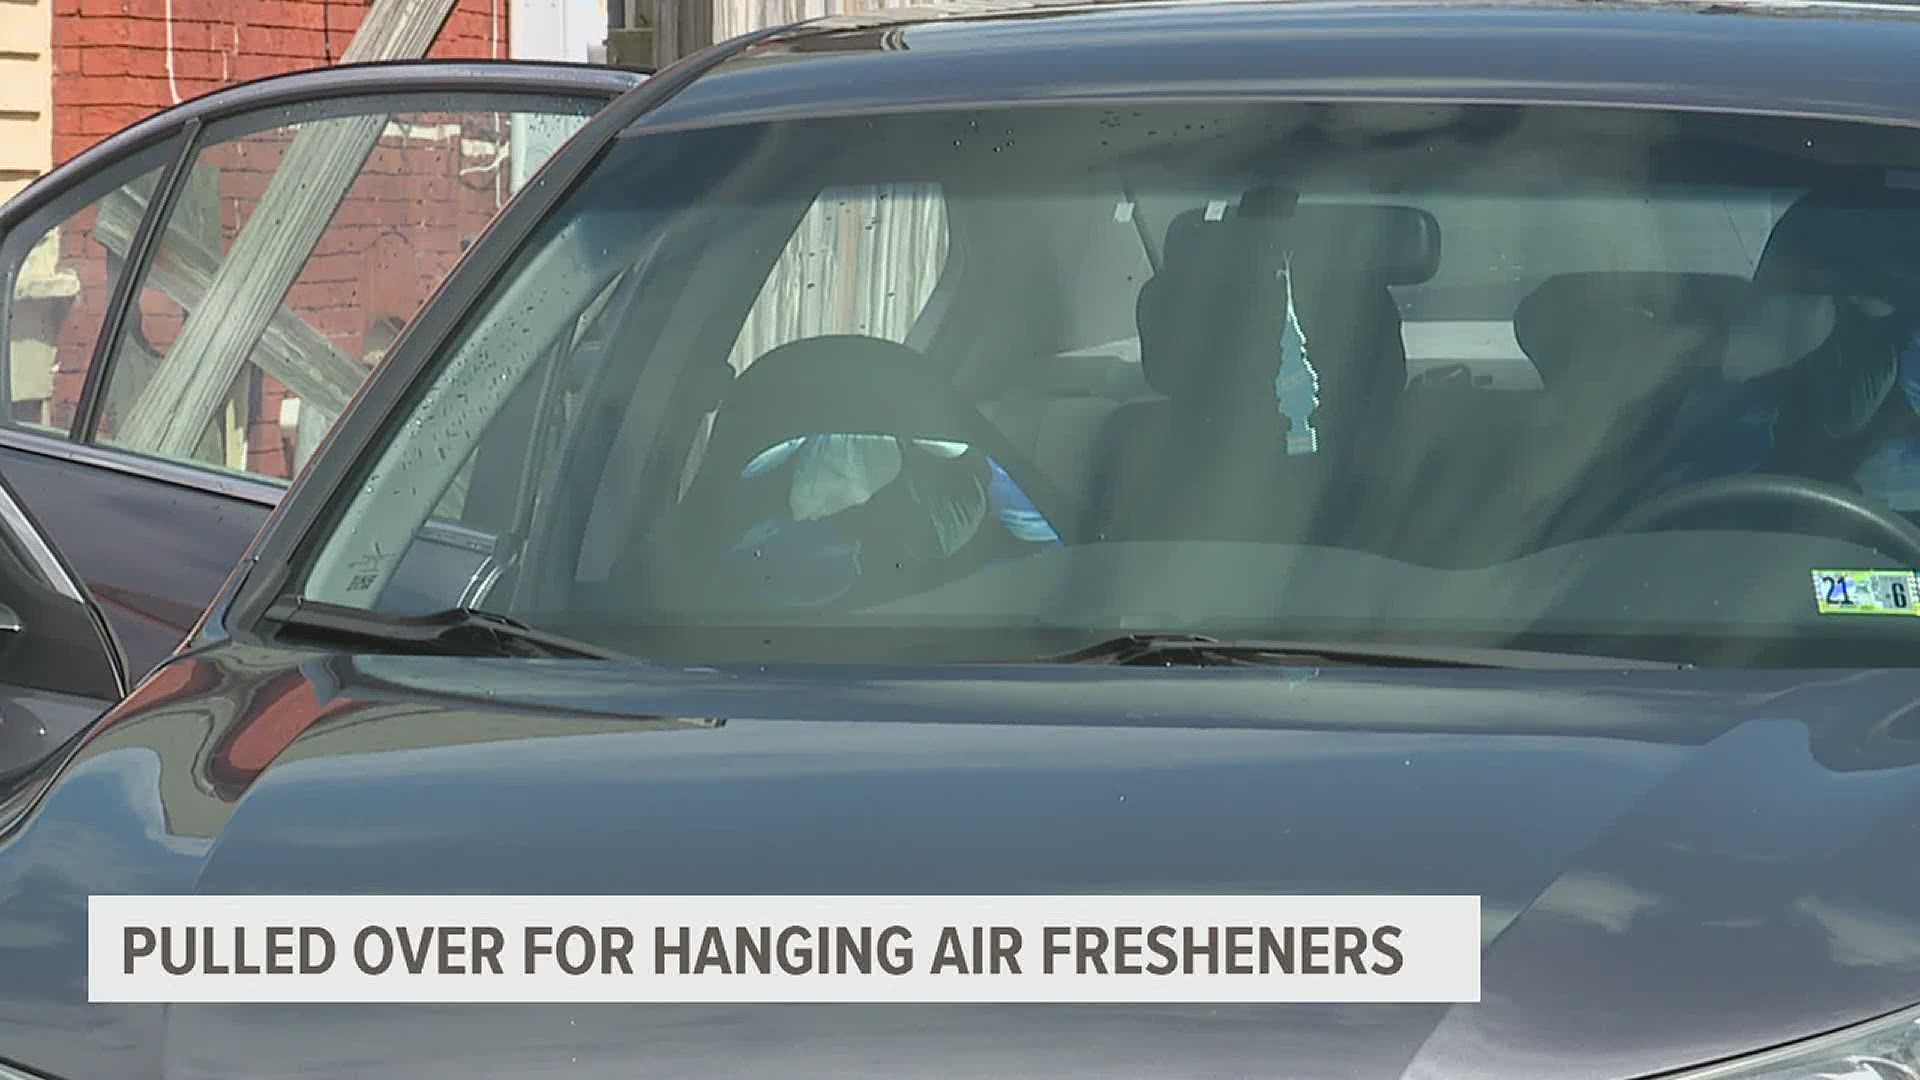 In Pennsylvania and at least five other states, drivers are prohibited from hanging objects from their rearview mirrors, including decorations and air fresheners.